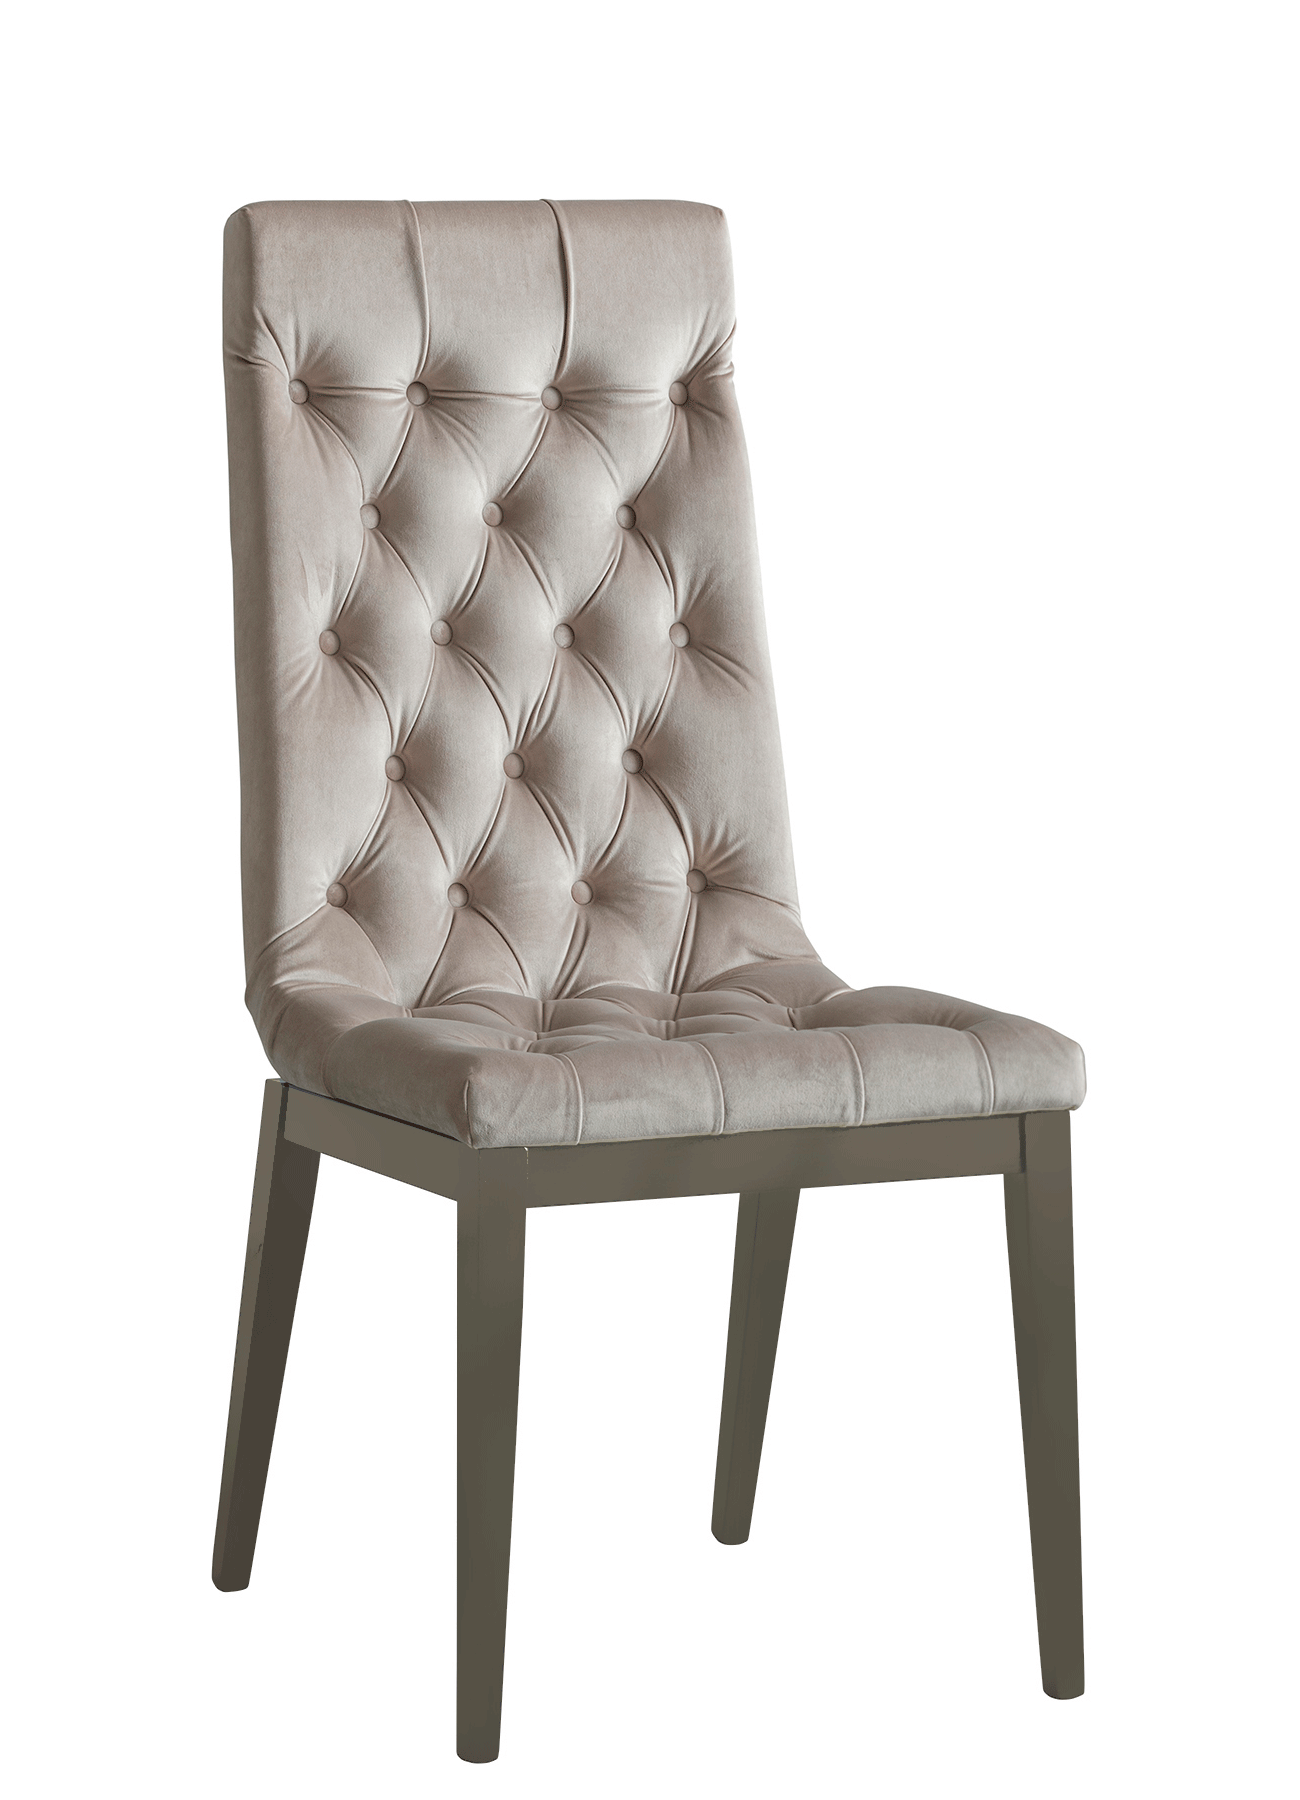 Living Room Furniture Swatches Volare chair GREY